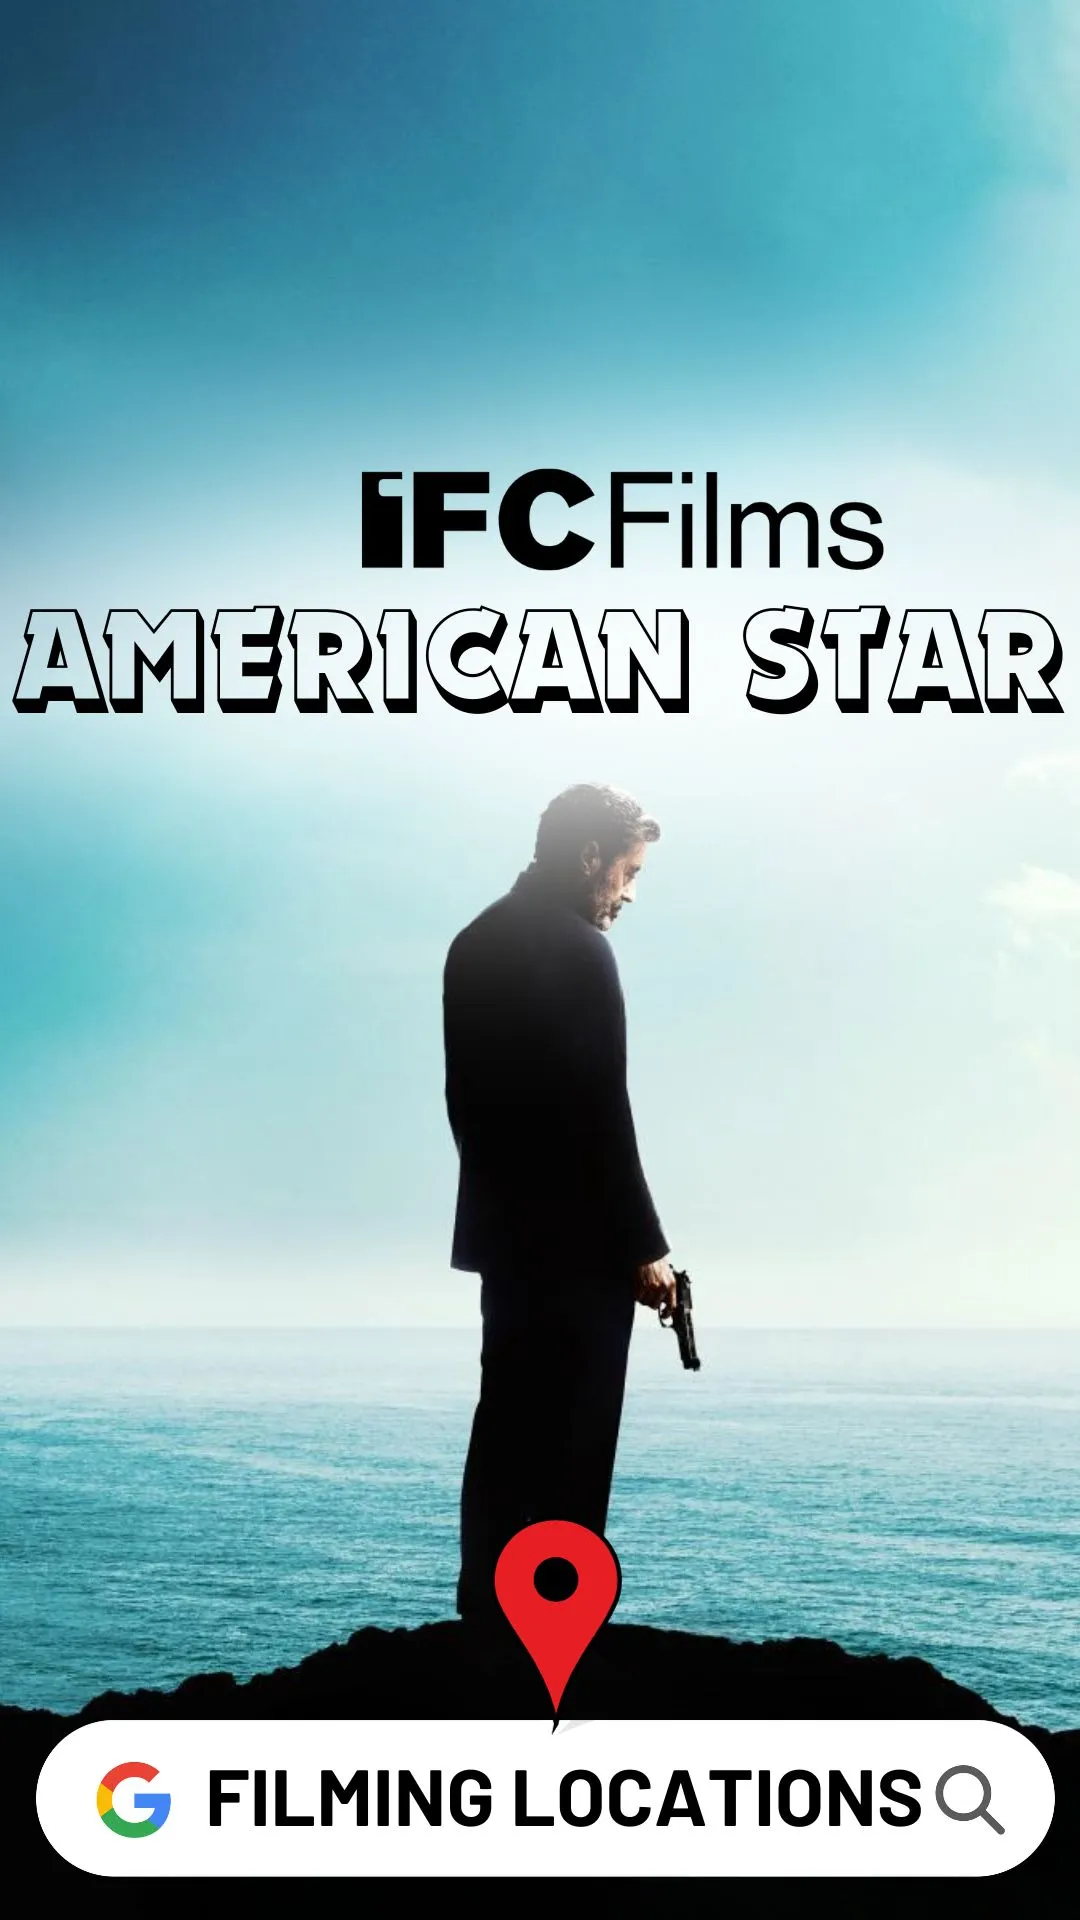 American Star Filming Locations